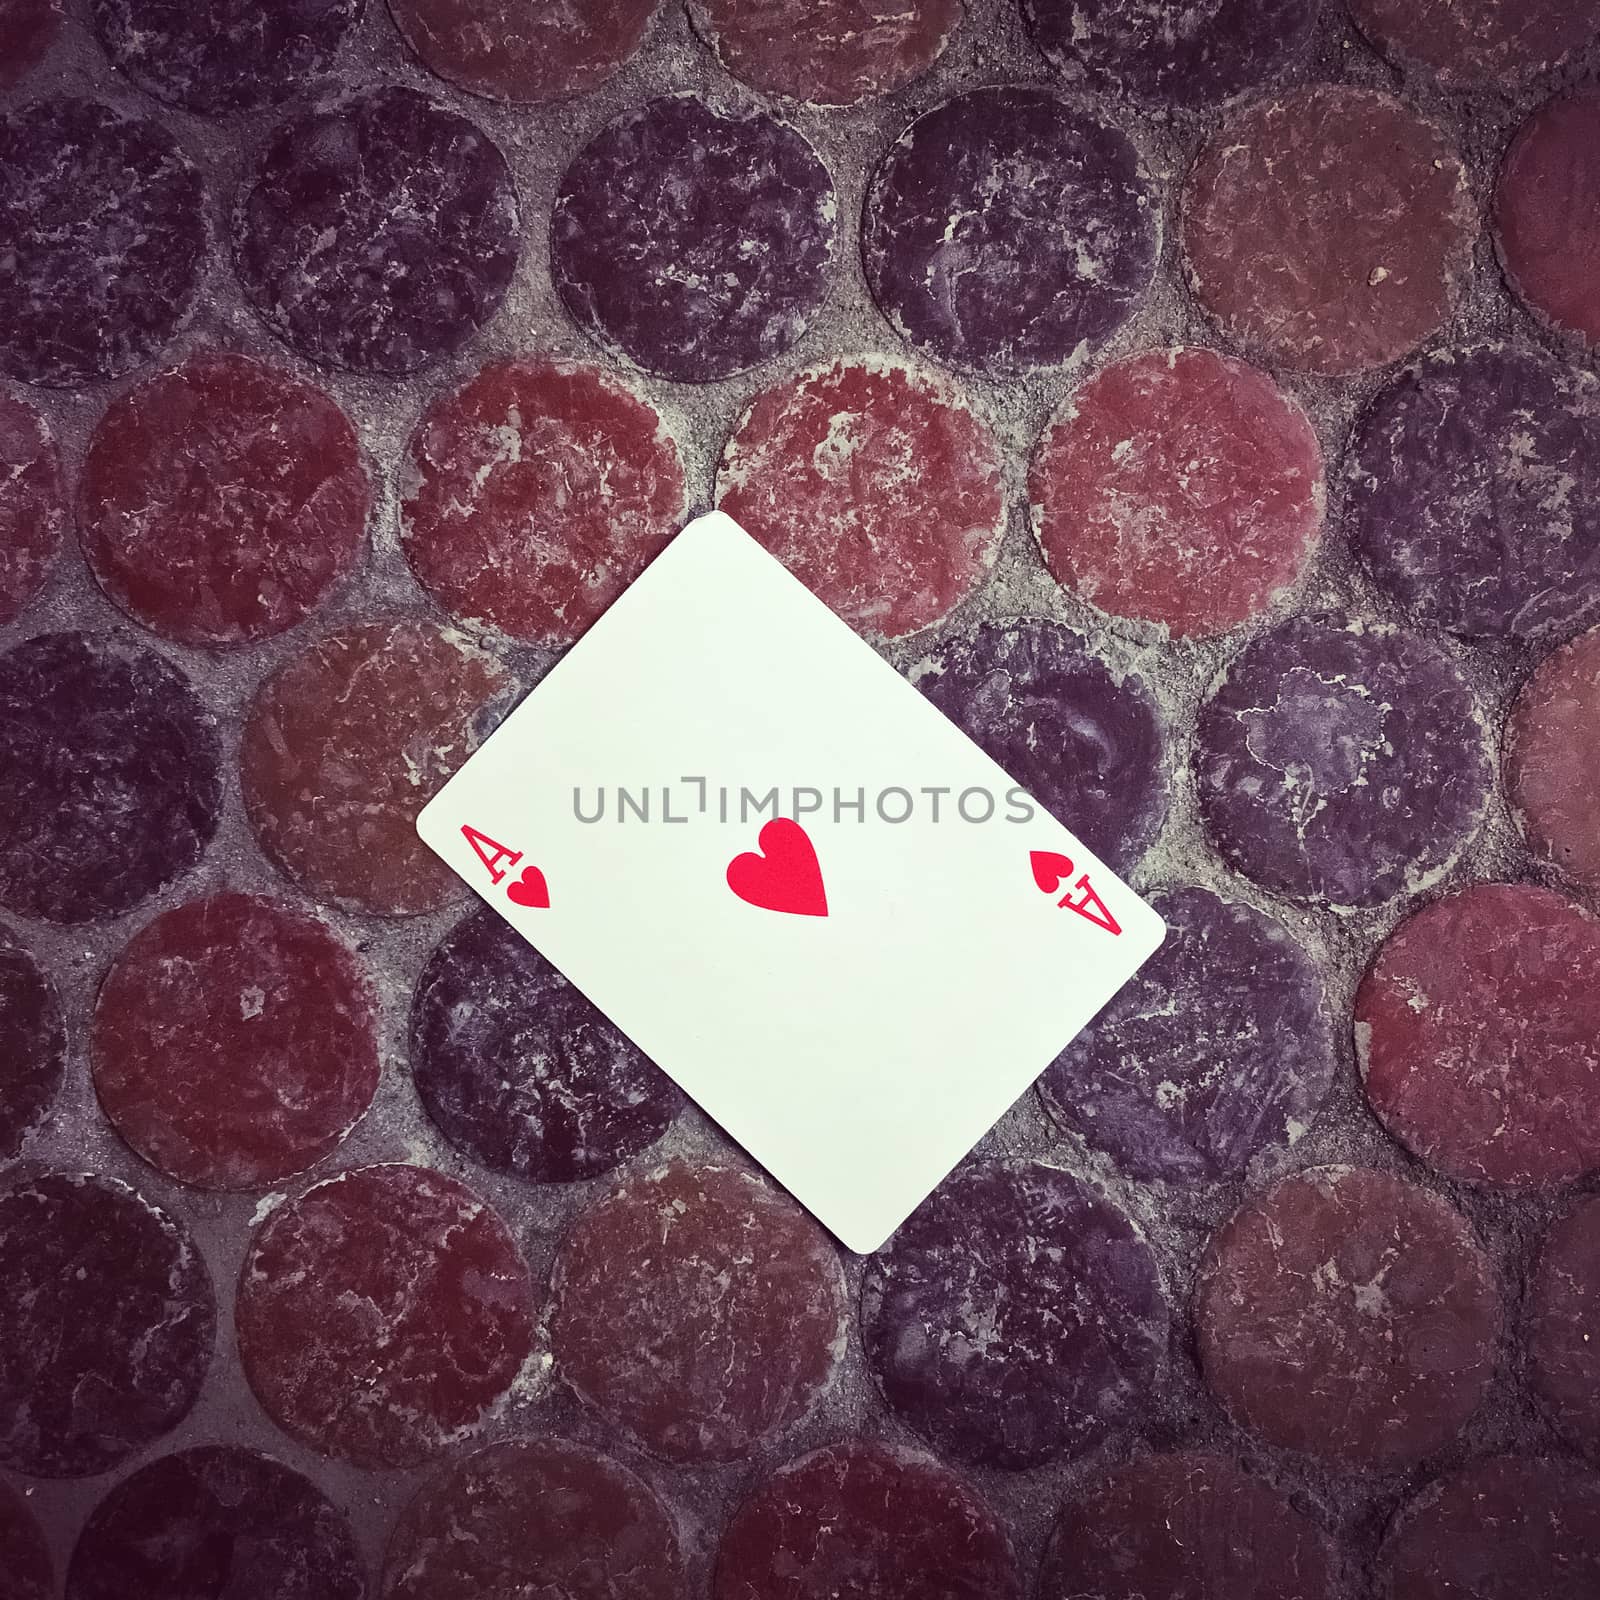 Ace of hearts card on the floor. Good luck concept.